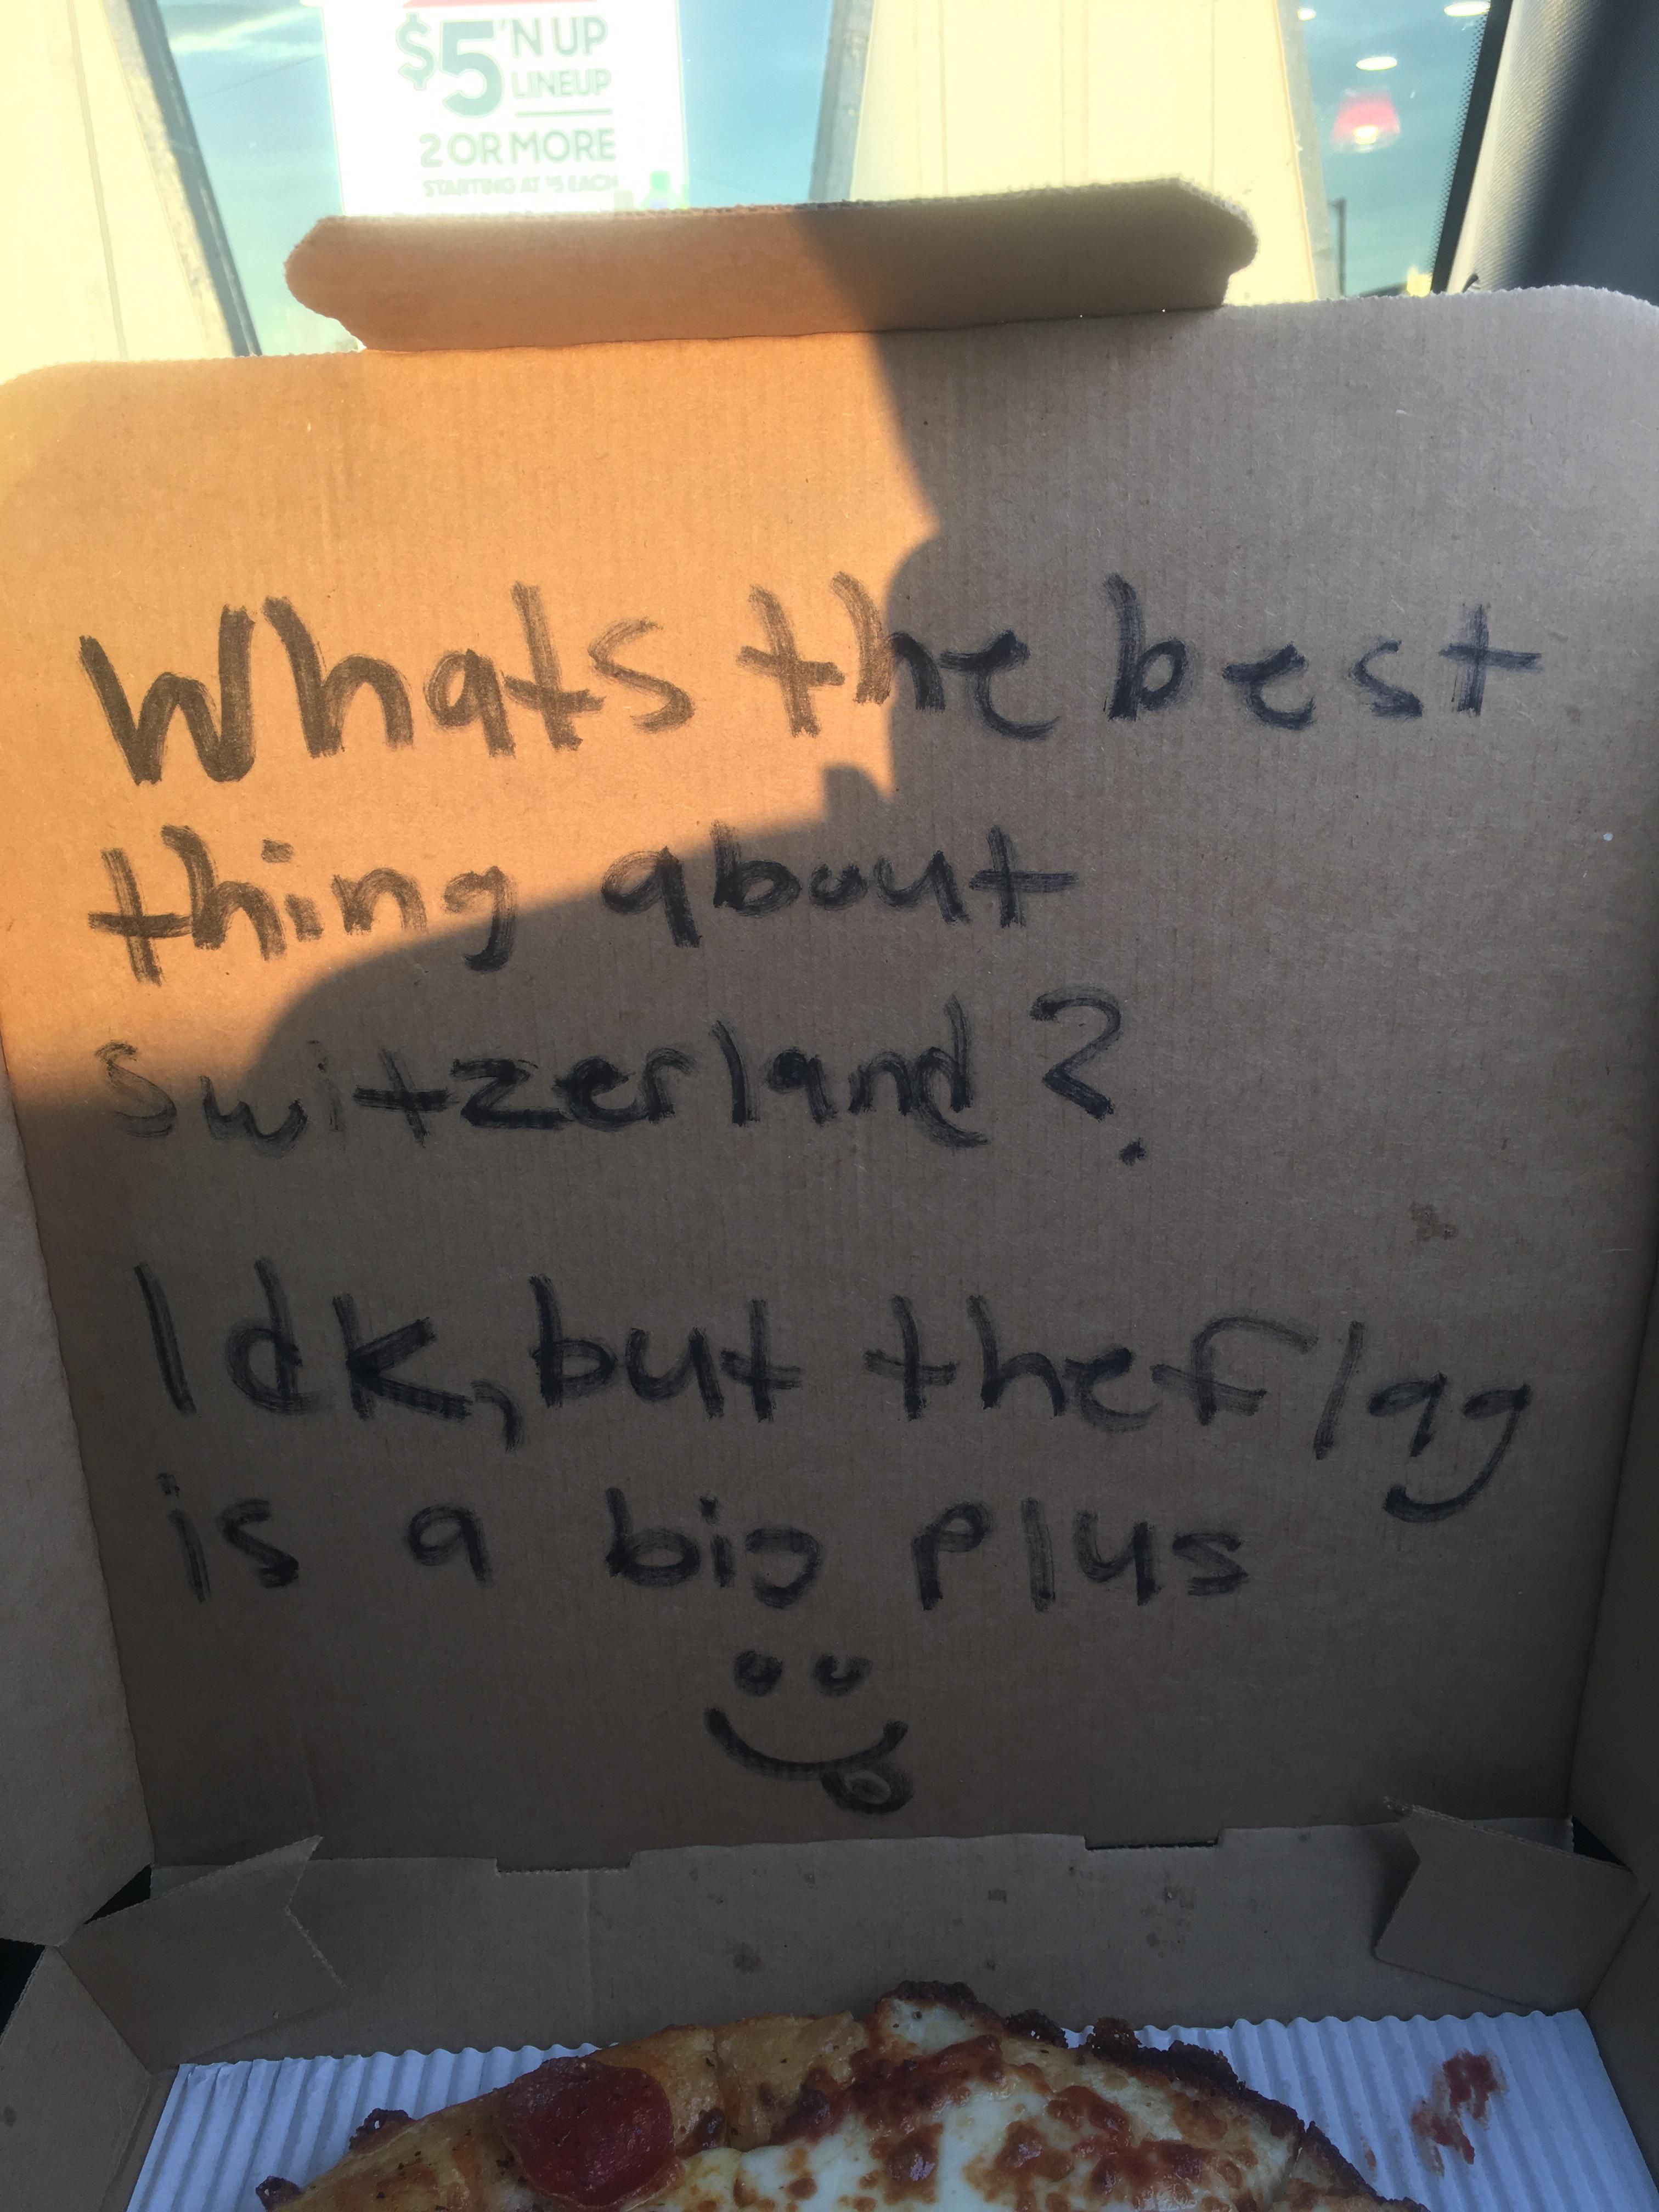 I asked the pizza guy to write a joke in the box, he did.